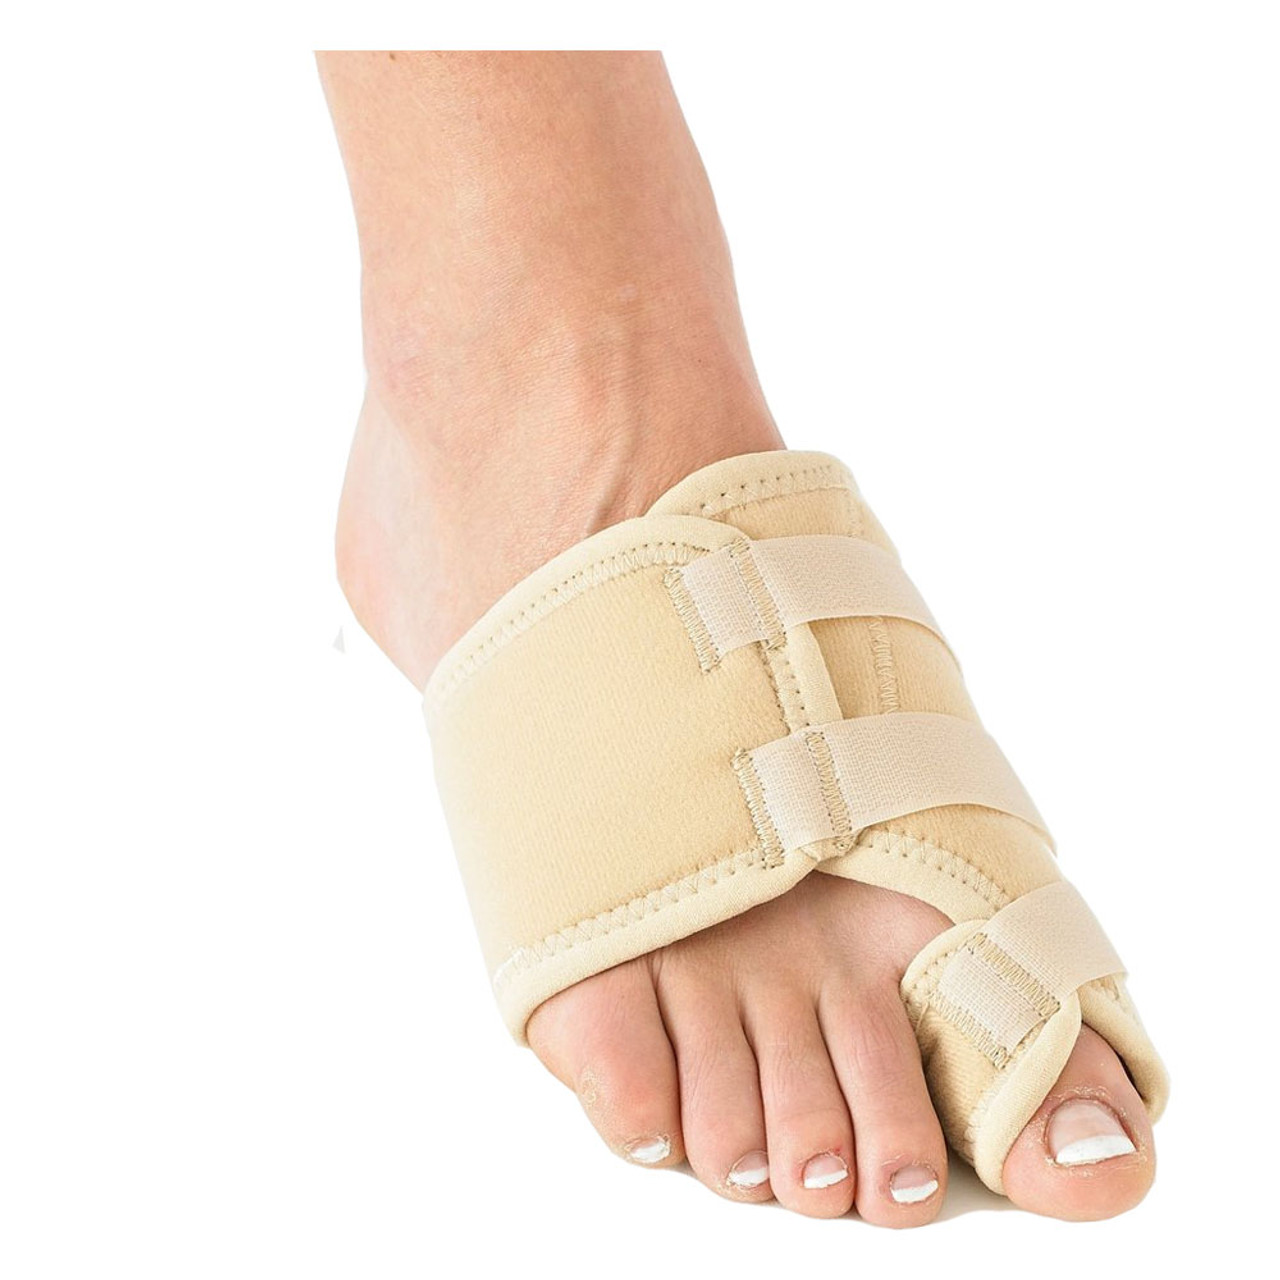 Neo G Ankle Support - One Size 